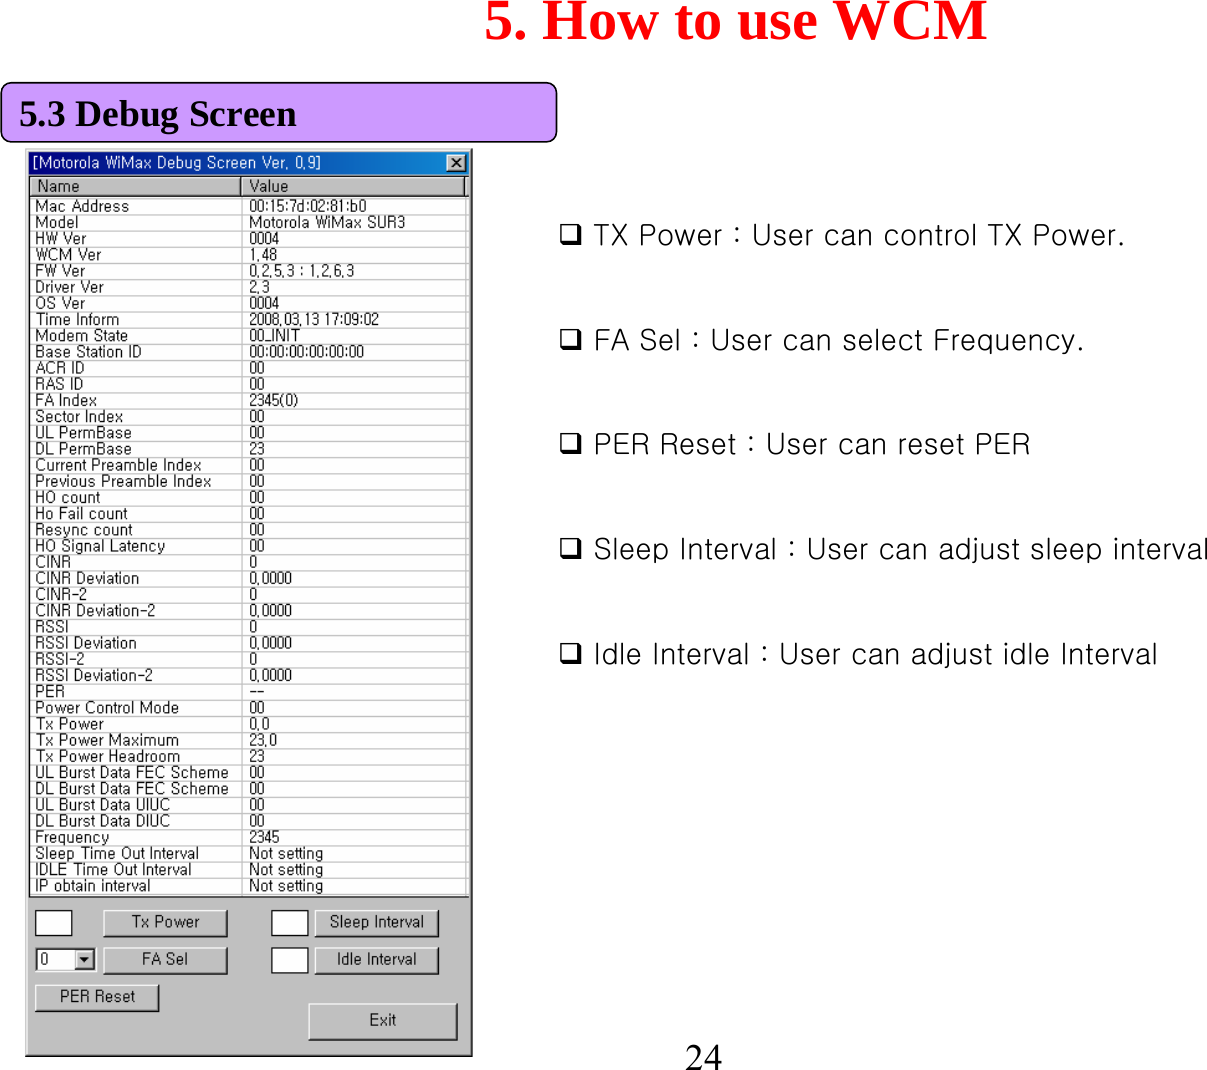 5. How to use WCM24TX Power : User can control TX Power.FA Sel : User can select Frequency.PER Reset : User can reset PERSleep Interval : User can adjust sleep intervalIdle Interval : User can adjust idle Interval5.3 Debug Screen